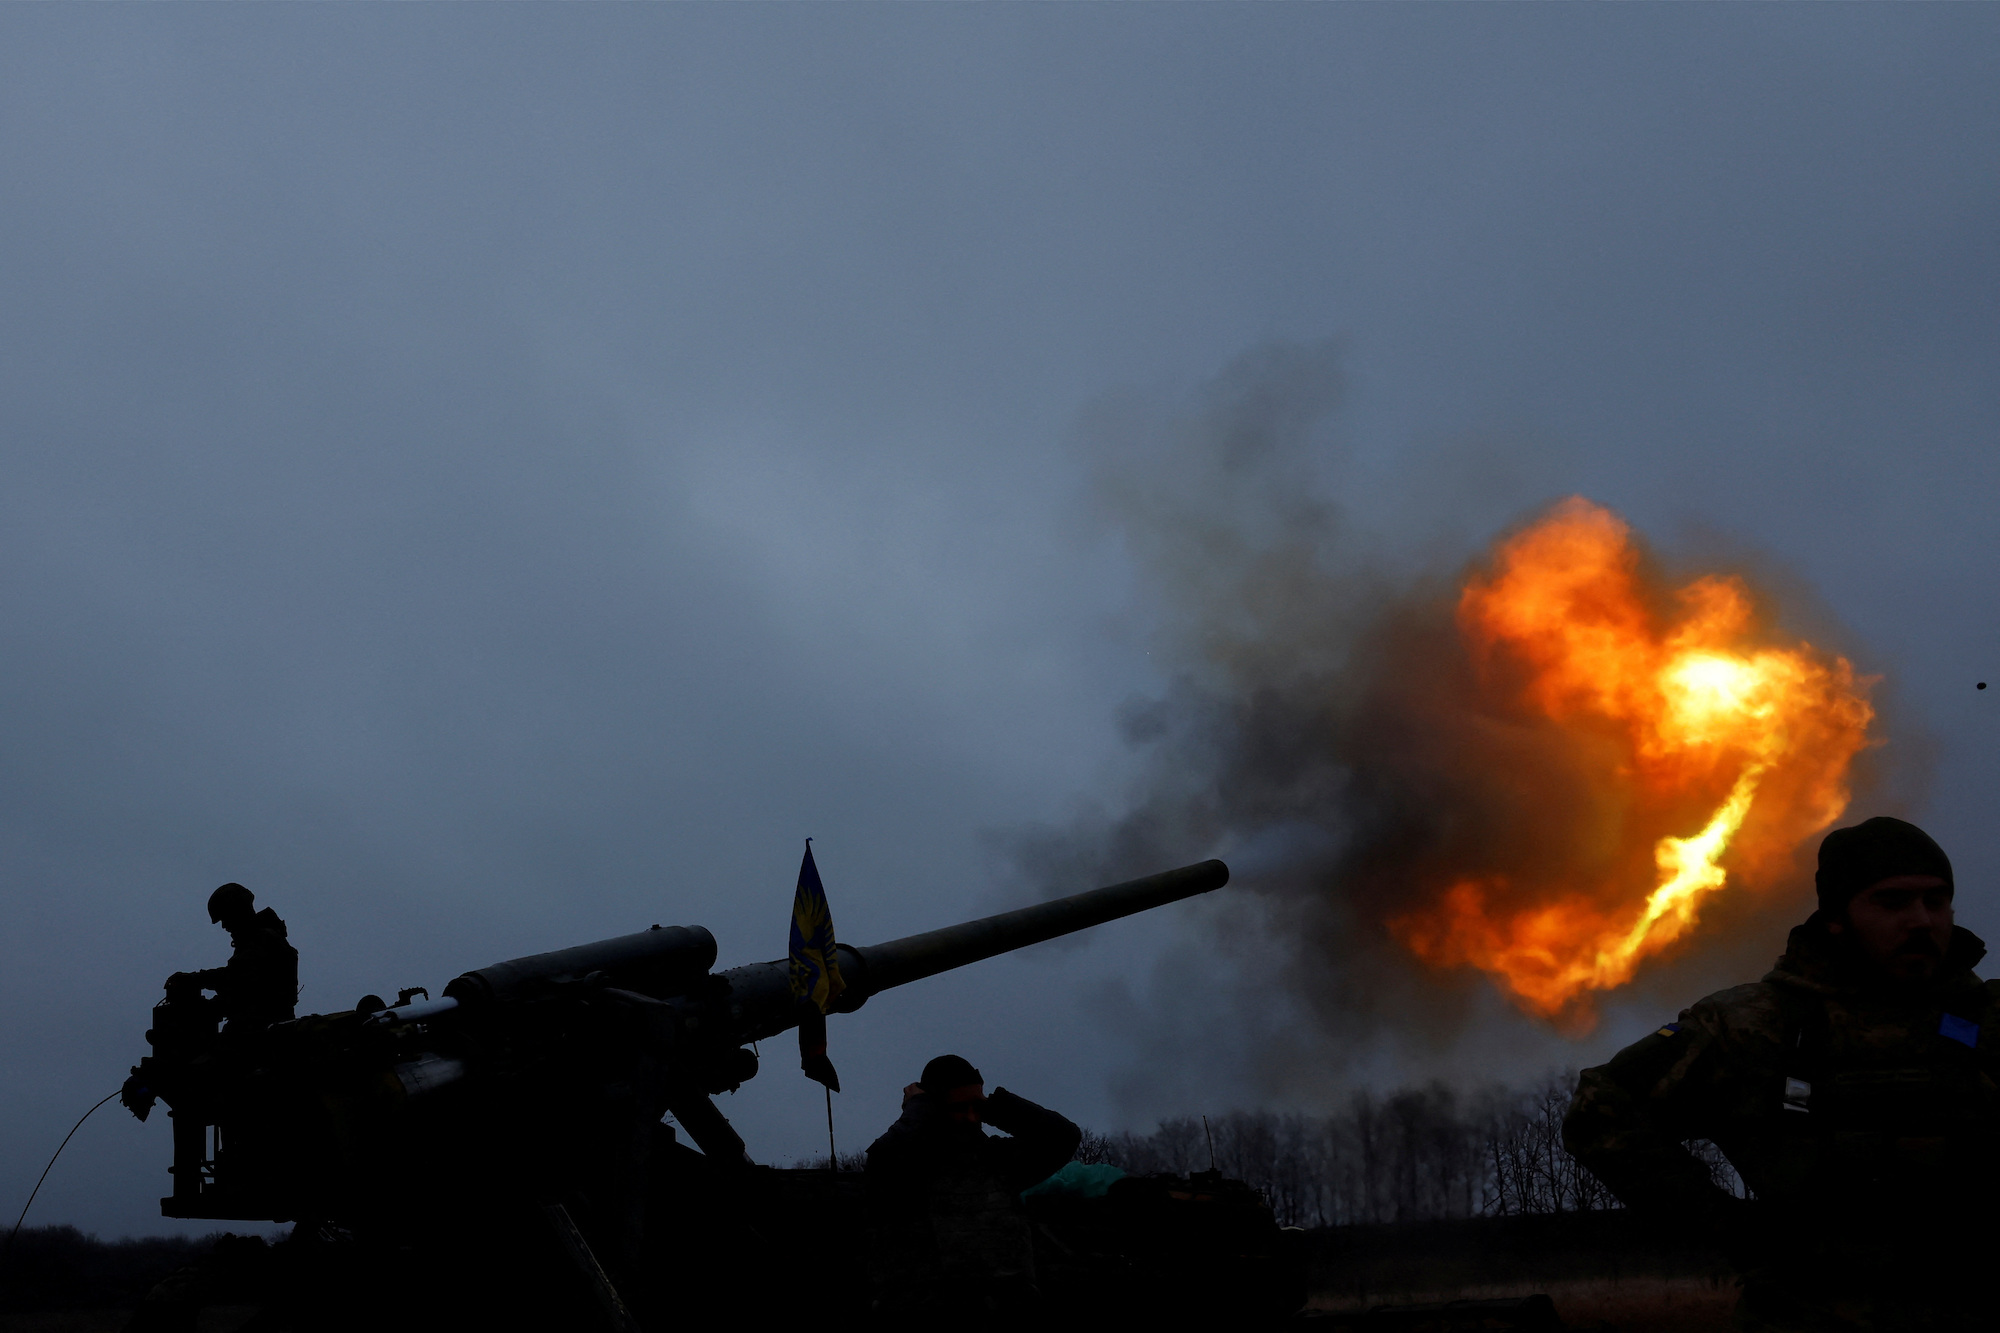 Ukrainian soldiers fire a projectile from a self-propelled cannon on the front line in Bakhmut on December 26, 2022.